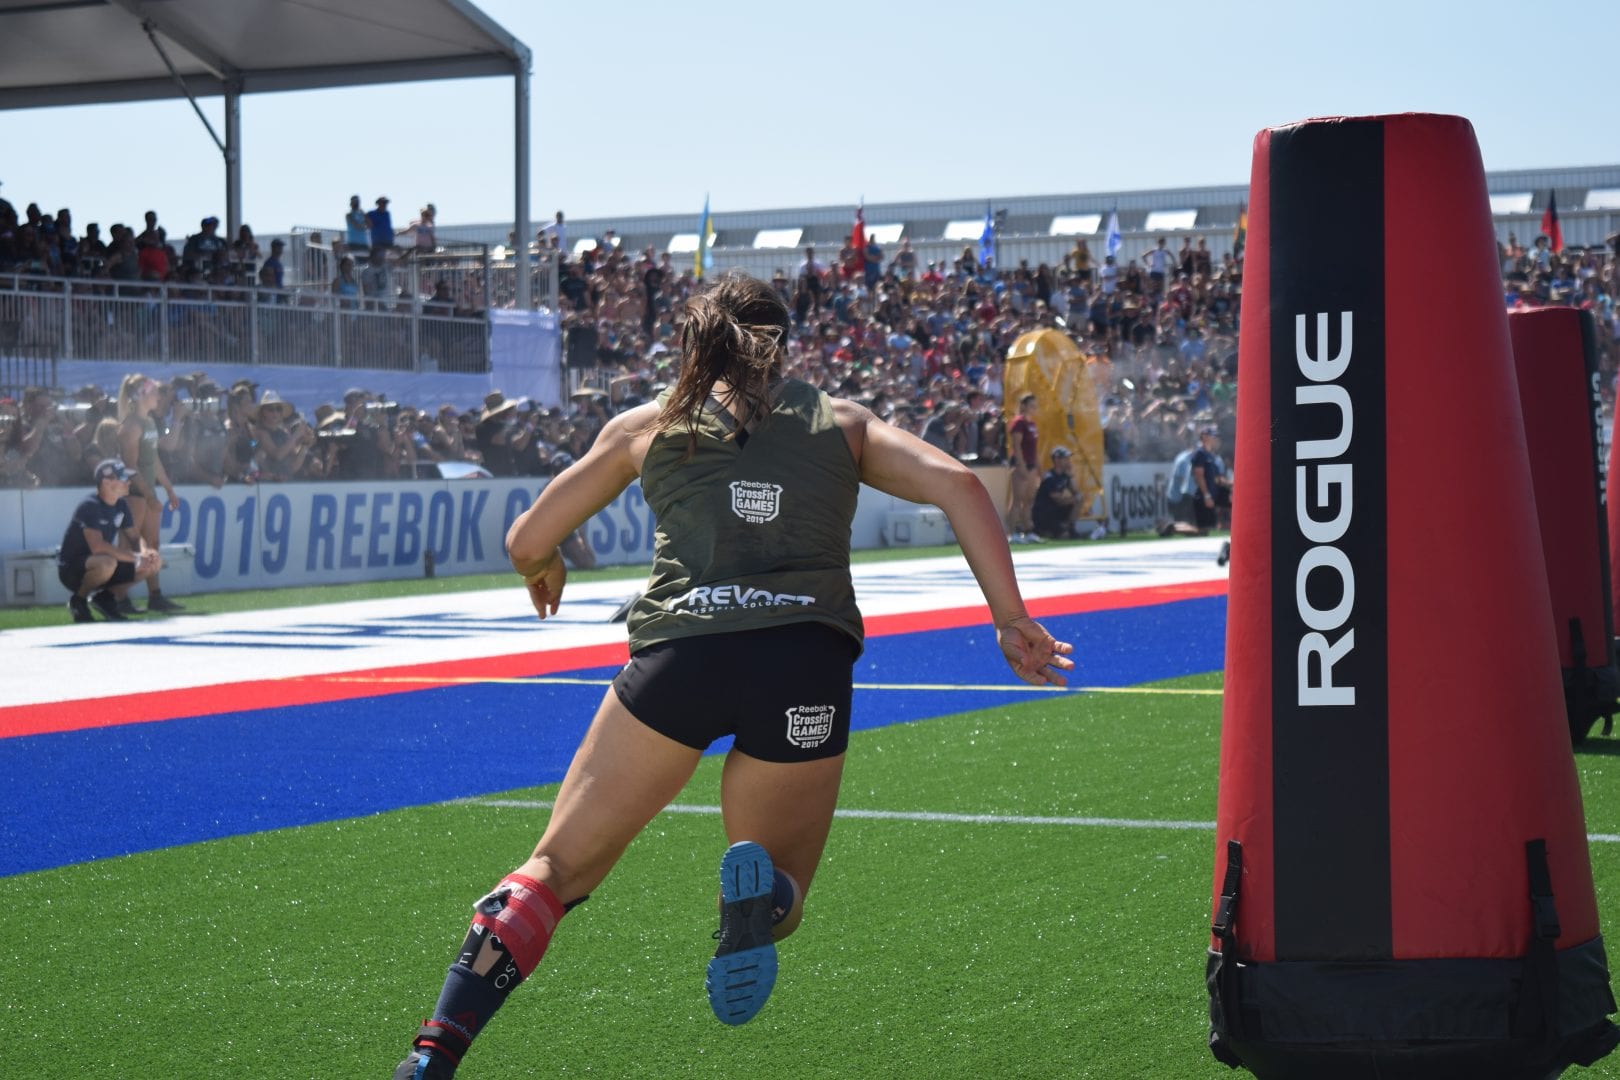 Carolyne Prevost of Canada competes in the Sprint event at the 2019 CrossFit Games